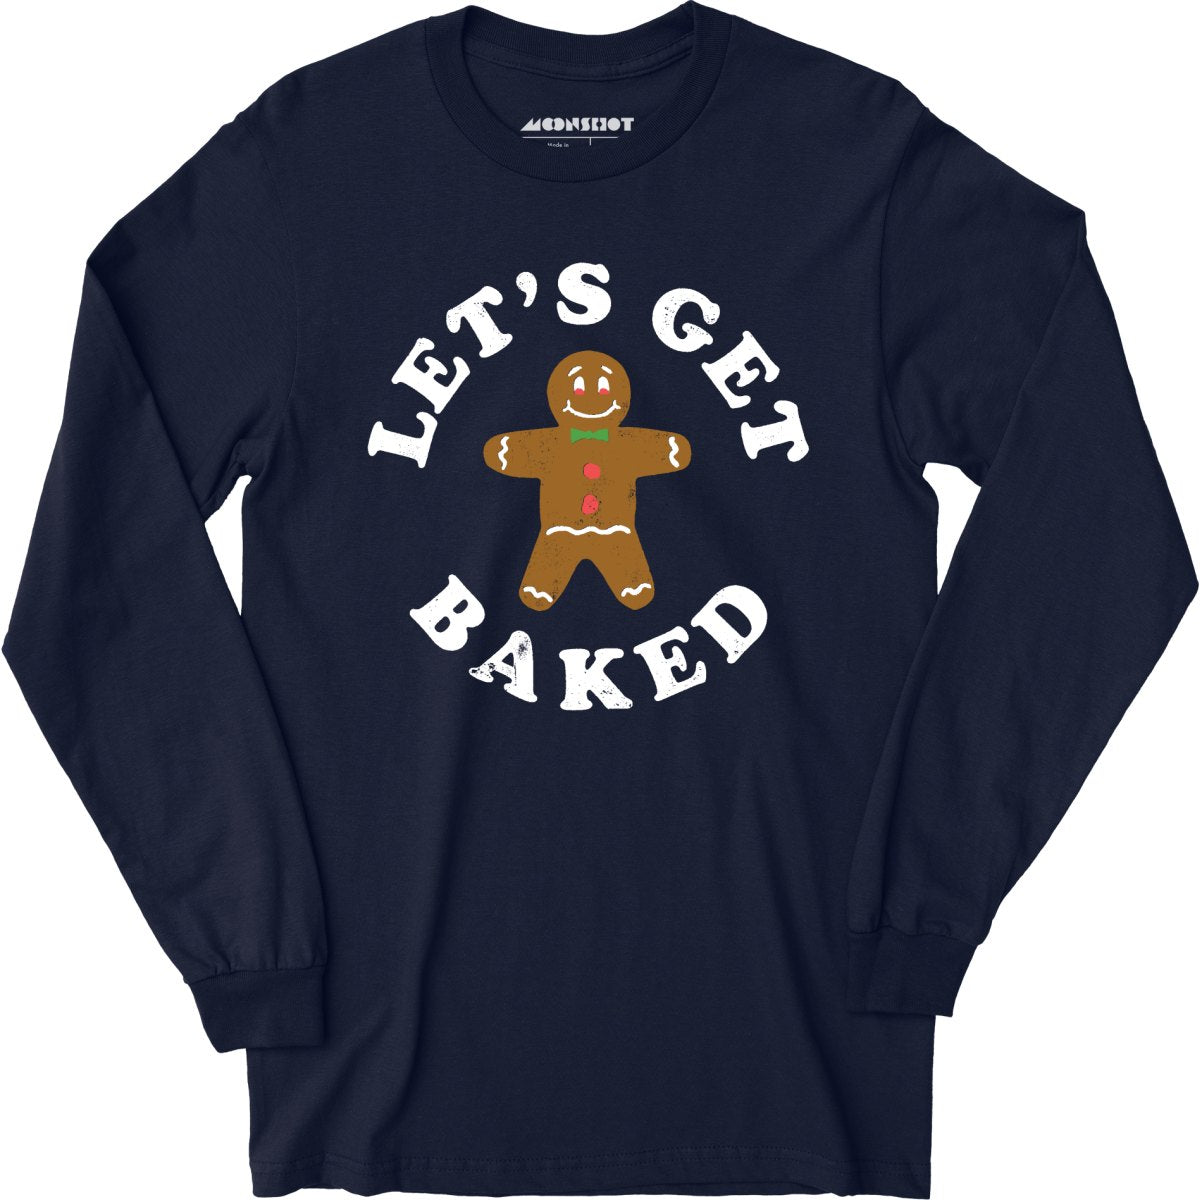 Let's Get Baked - Long Sleeve T-Shirt